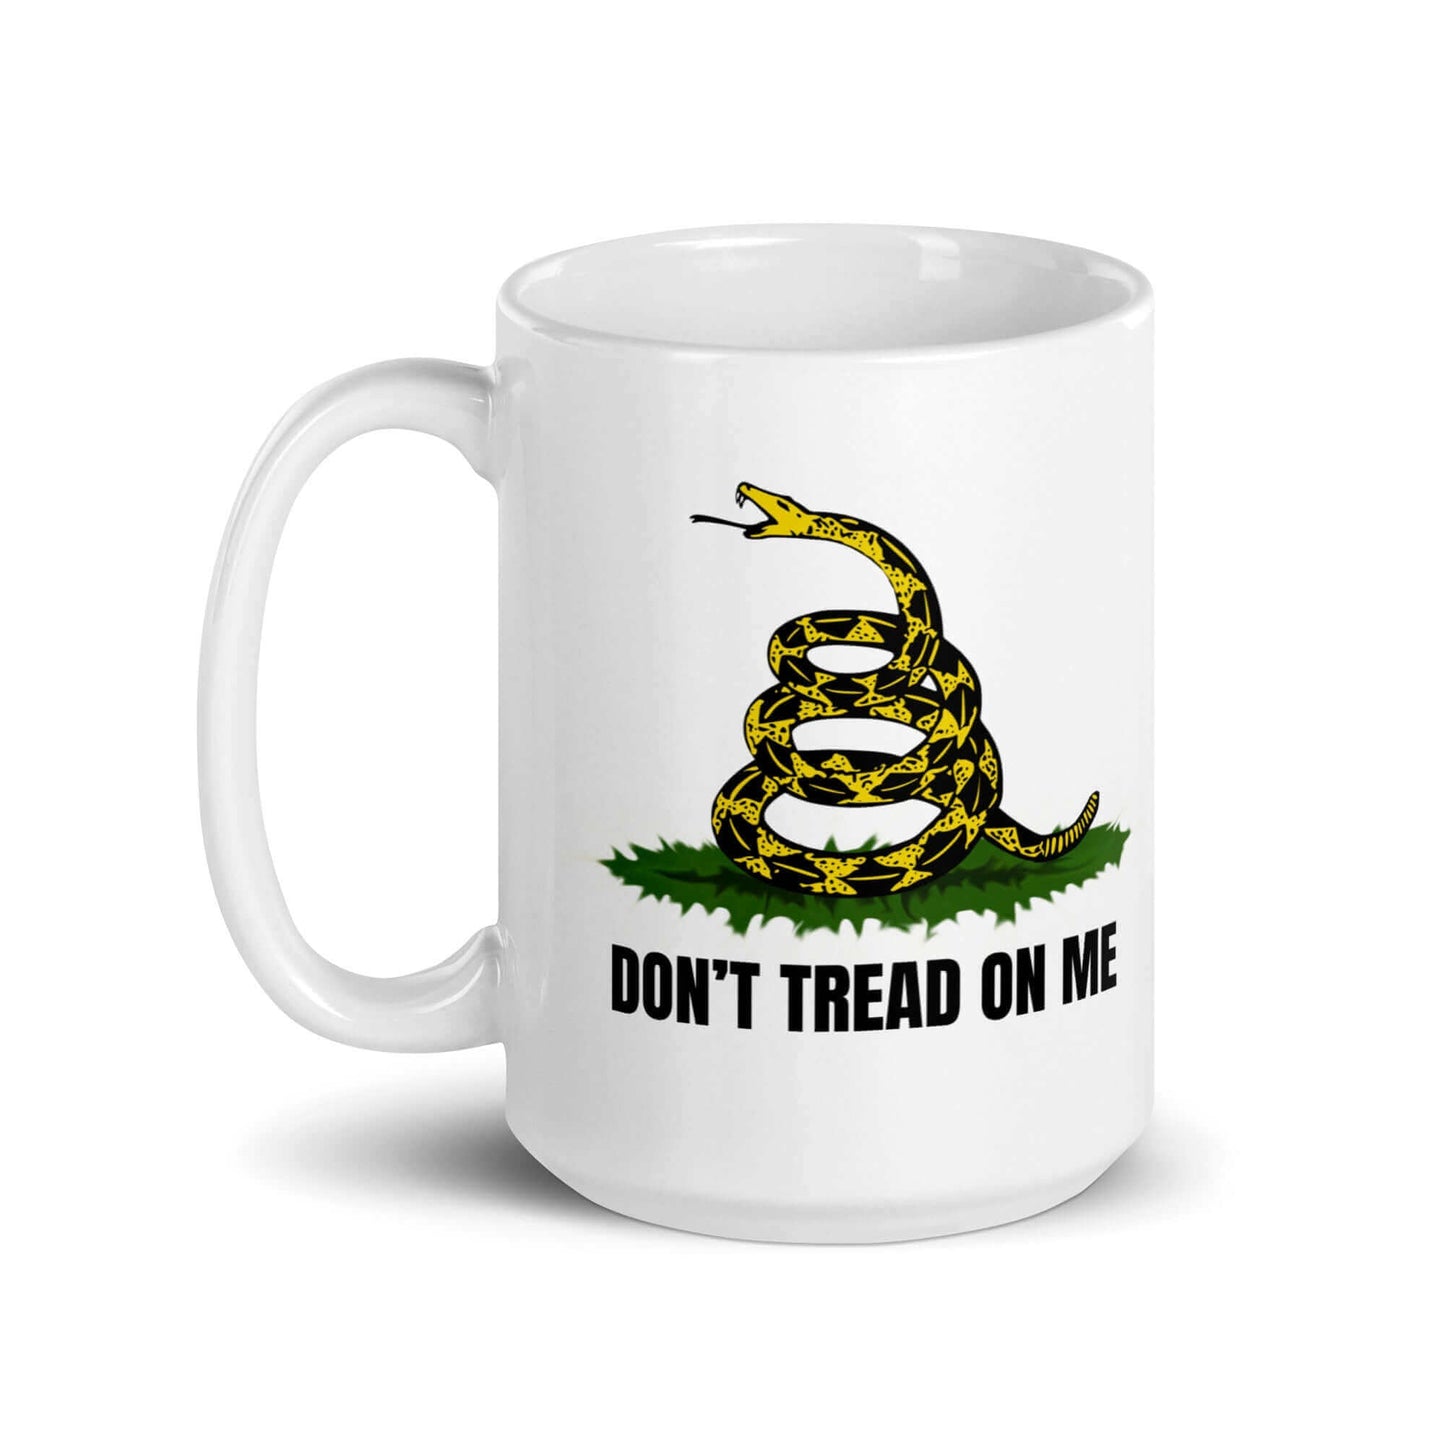 Don't tread on me - White glossy mug 2nd amendment 4th of july agorism constitution dont tread on me freedom gadsden libertarian liberty liberty snake original intent second amendmnet voluntary